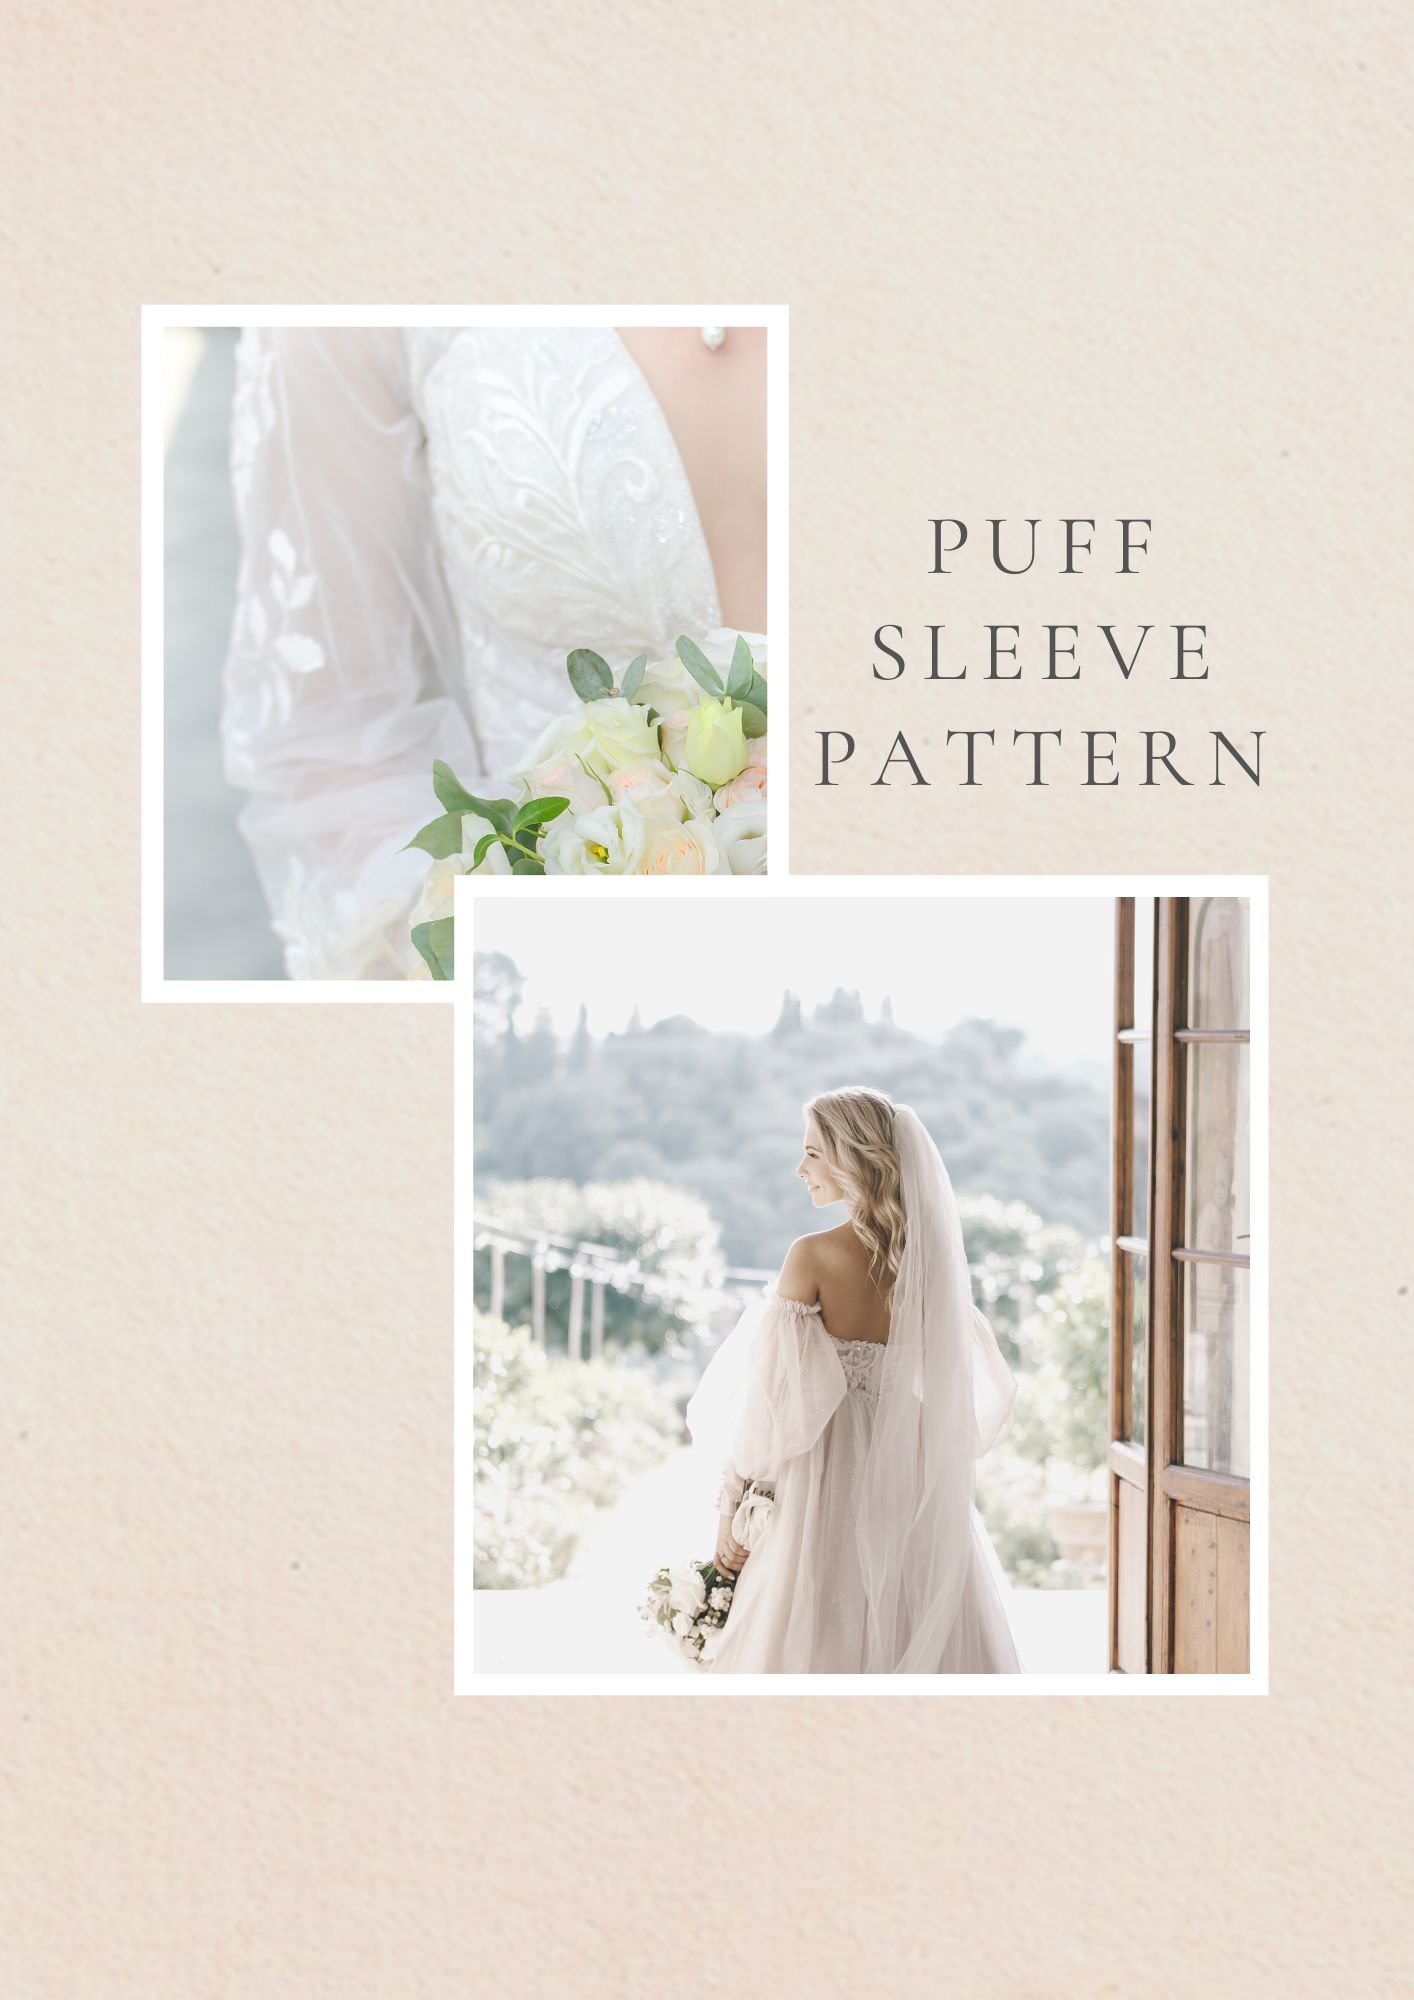 Sheer material bishop puff sleeve pattern for a romantic look